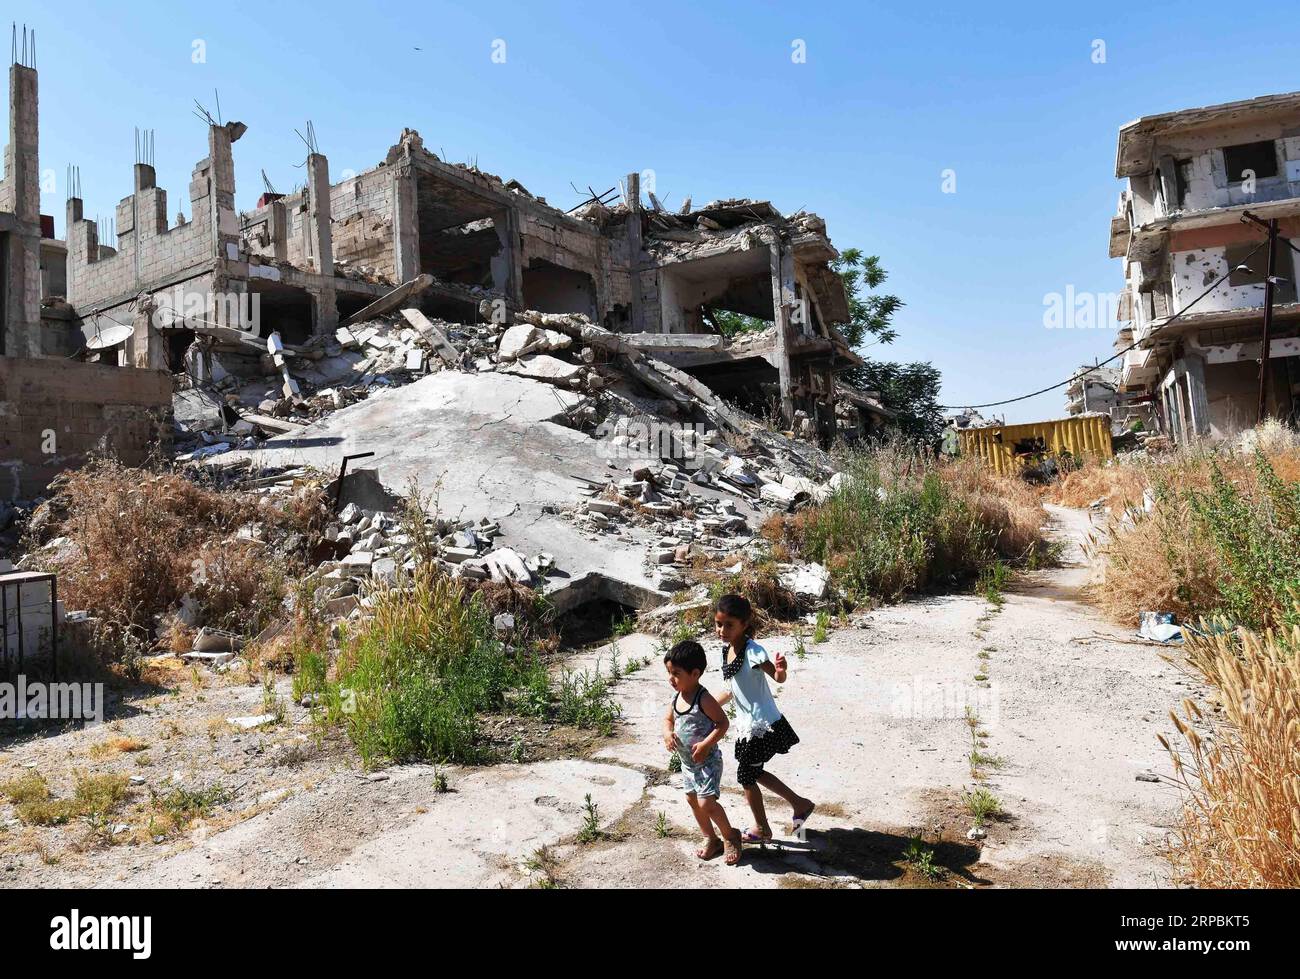 (190611) -- HOMS, June 11, 2019 -- Children of Kamal Shtaiwi play near their house in the Wadi al-Sayeh street in the central city of Homs, Syria, May 29, 2019. Kamal Shtaiwi, 58, enjoys returning to his home with his wife and four children, even though it is surrounded by the destruction of war. TO GO WITH Feature: Displaced Syrian family back home, sweet home amid rubble ) SYRIA-HOMS-DISPLACED SYRIAN FAMILY-HOME AmmarxSafarjalani PUBLICATIONxNOTxINxCHN Stock Photo